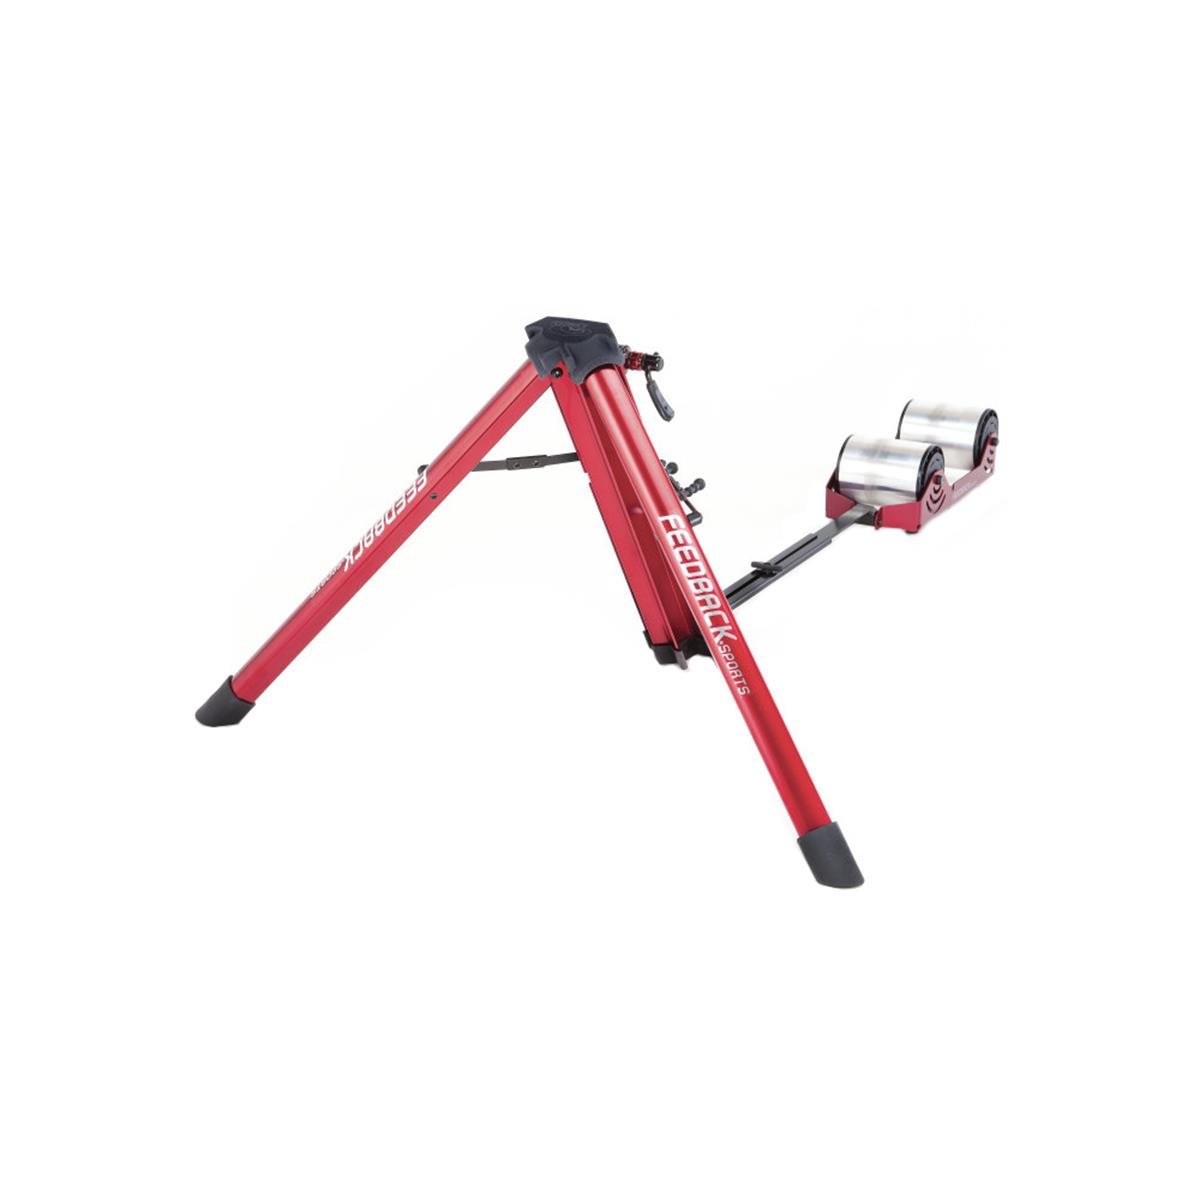 Feedback Sports Rollers Omnium Over-Drive Fork-Mount, magnetic resistance, 1050 W